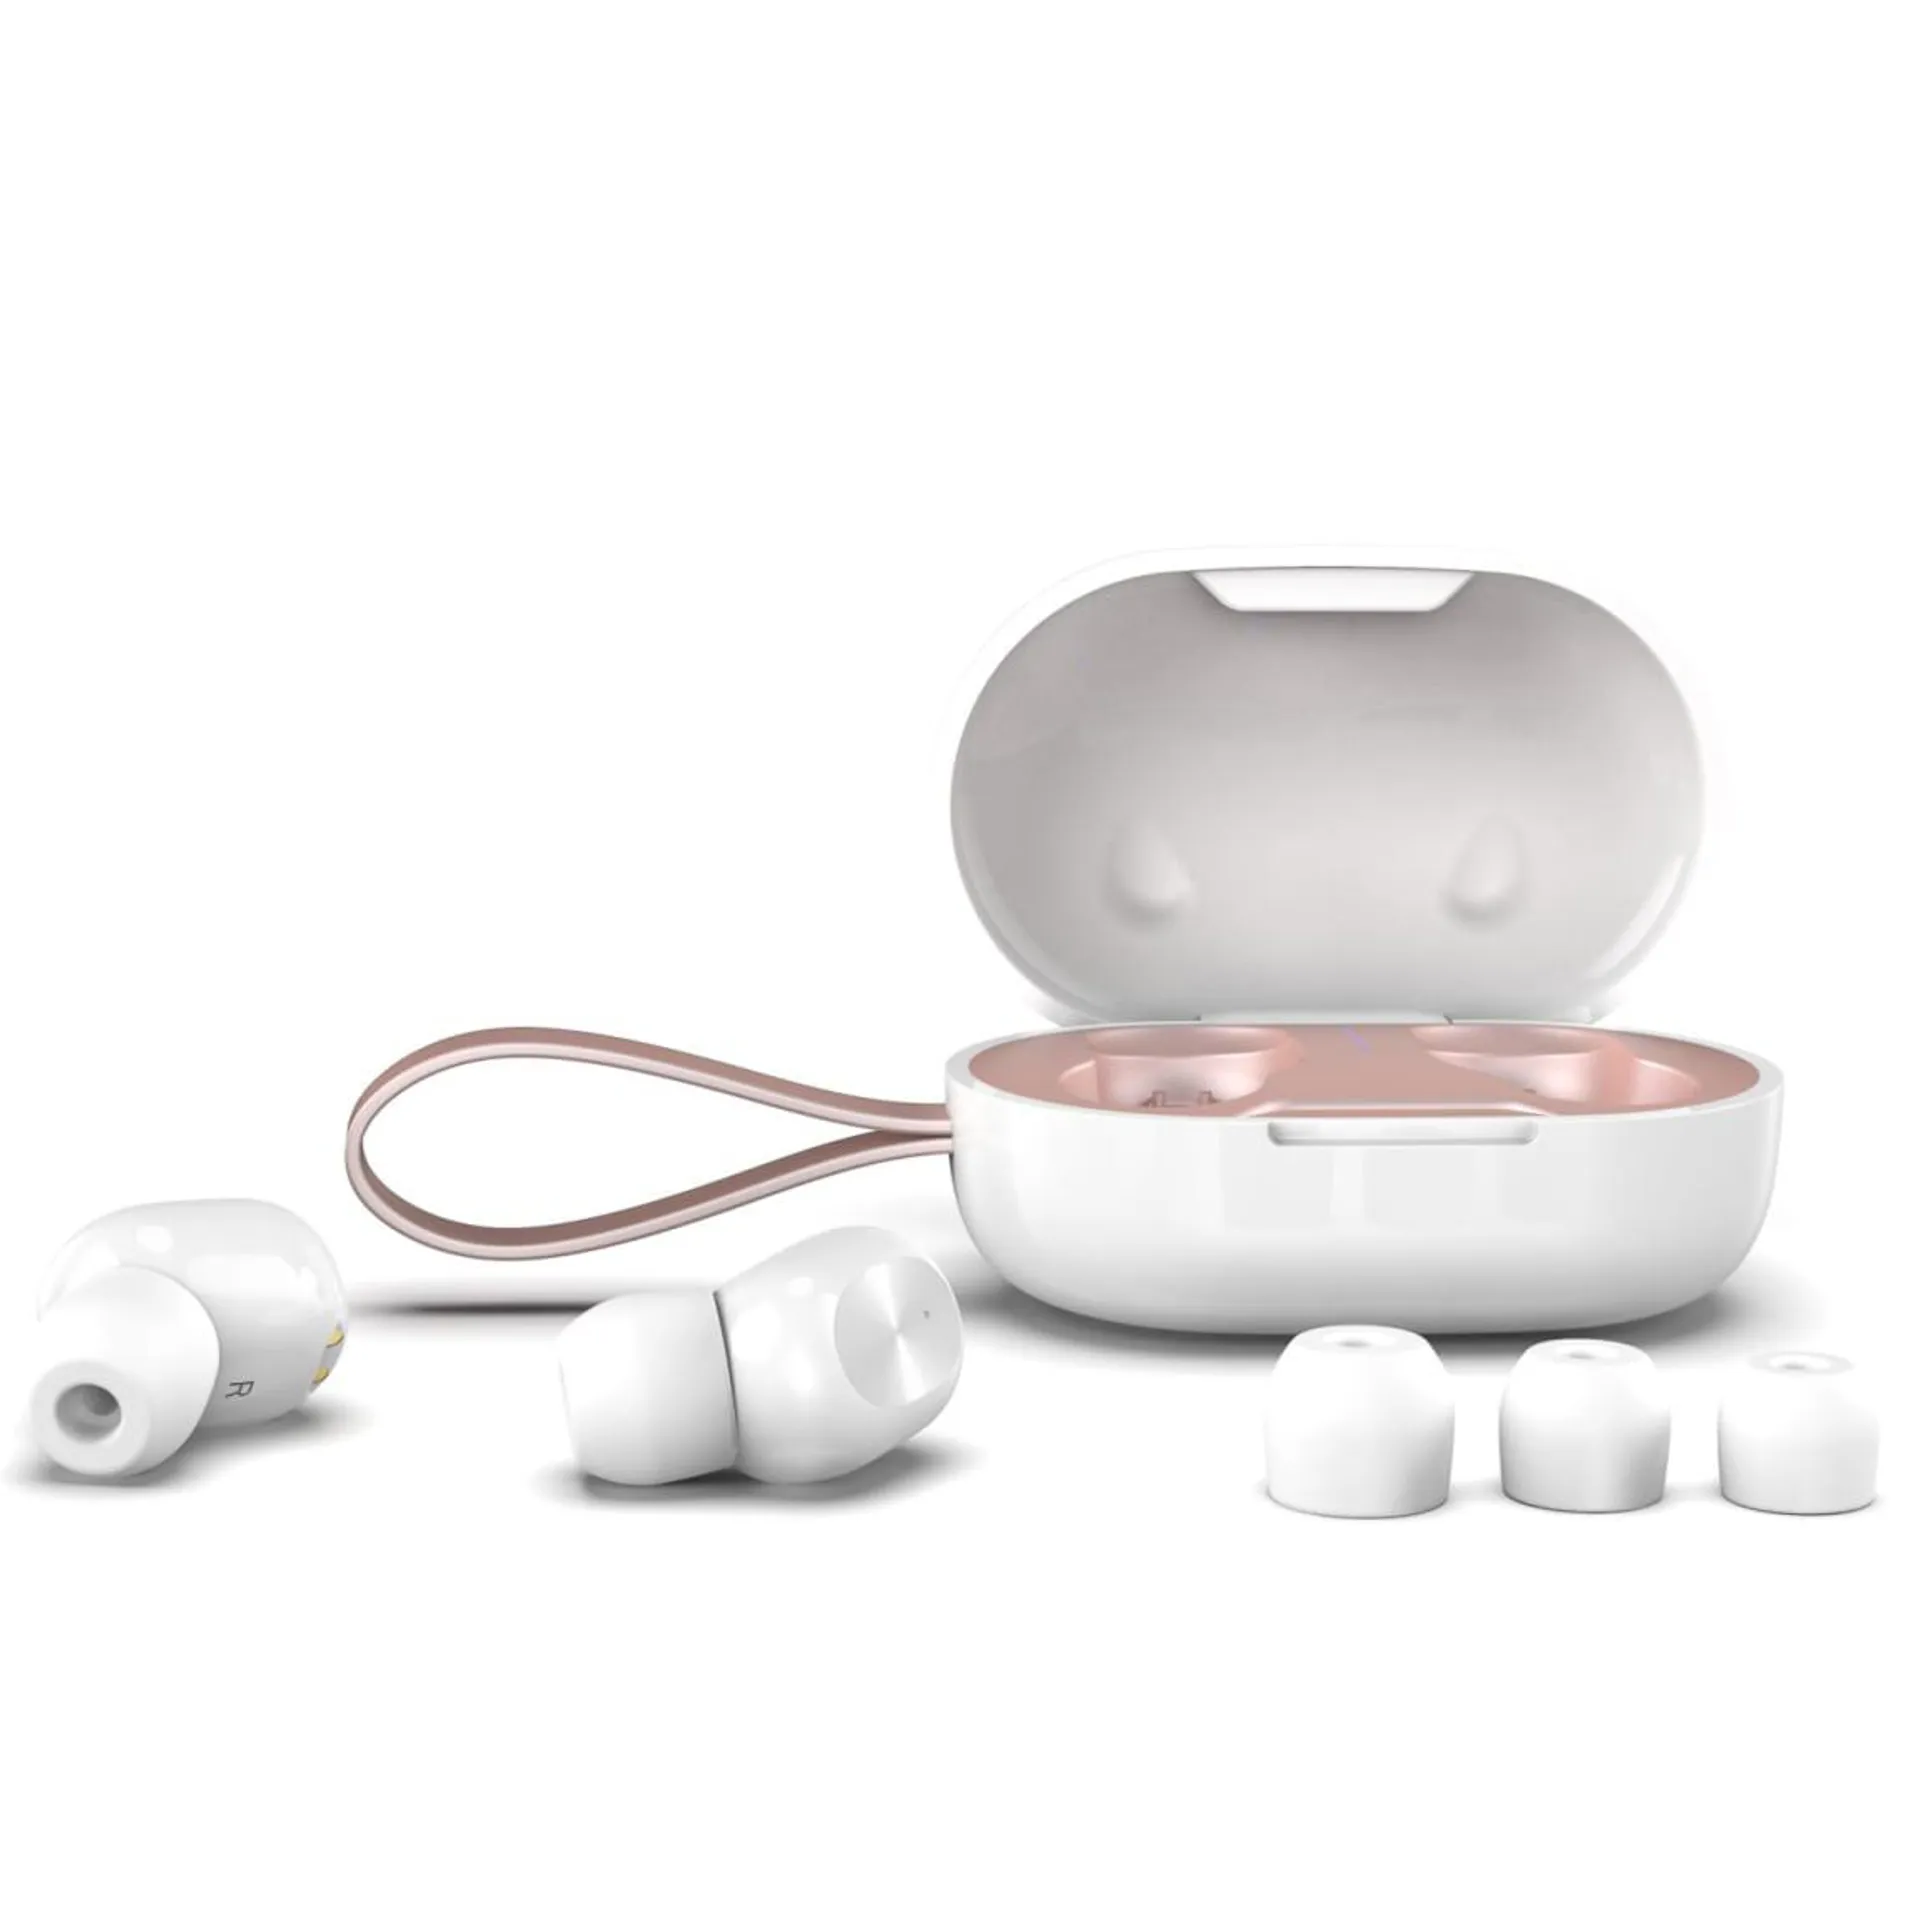 Air 8 True Wireless Earbuds - White & Rose Gold